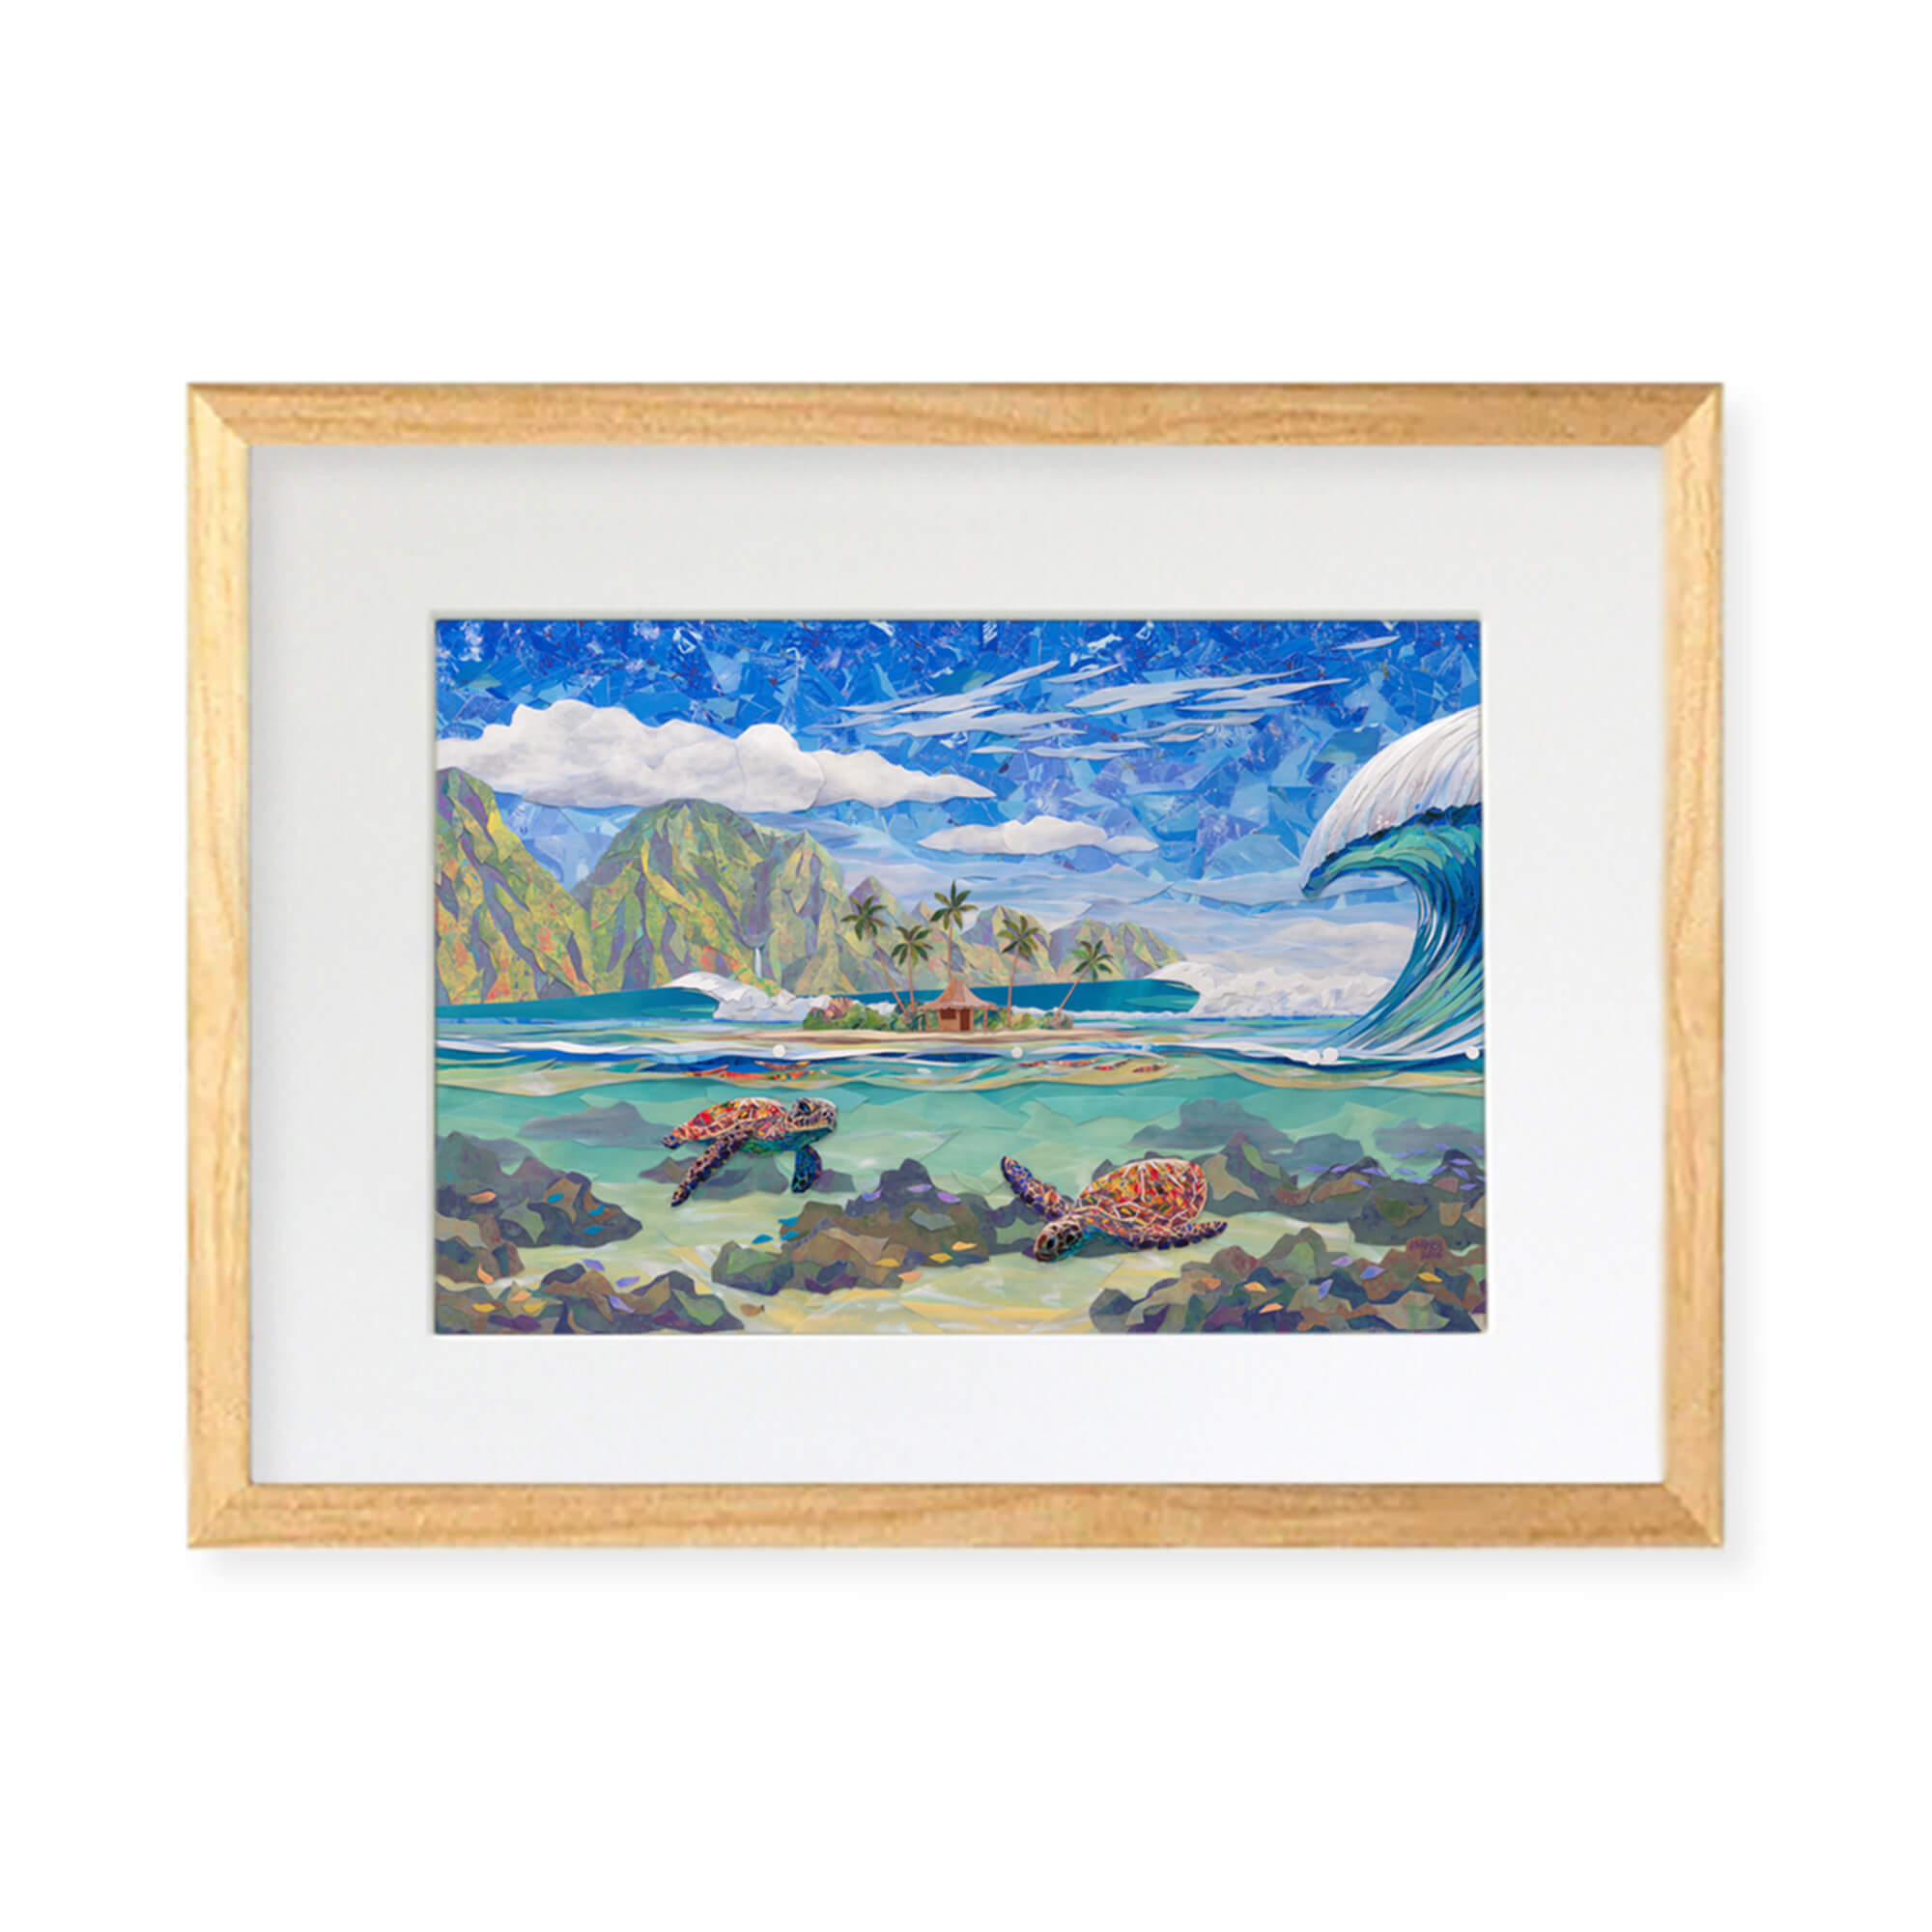 A framed matted art print featuring a collage of a tranquil seascape with two swimming sea turtles a hut on an island, a huge crashing wave, and a mountain background by Hawaii artist Patrick Parker